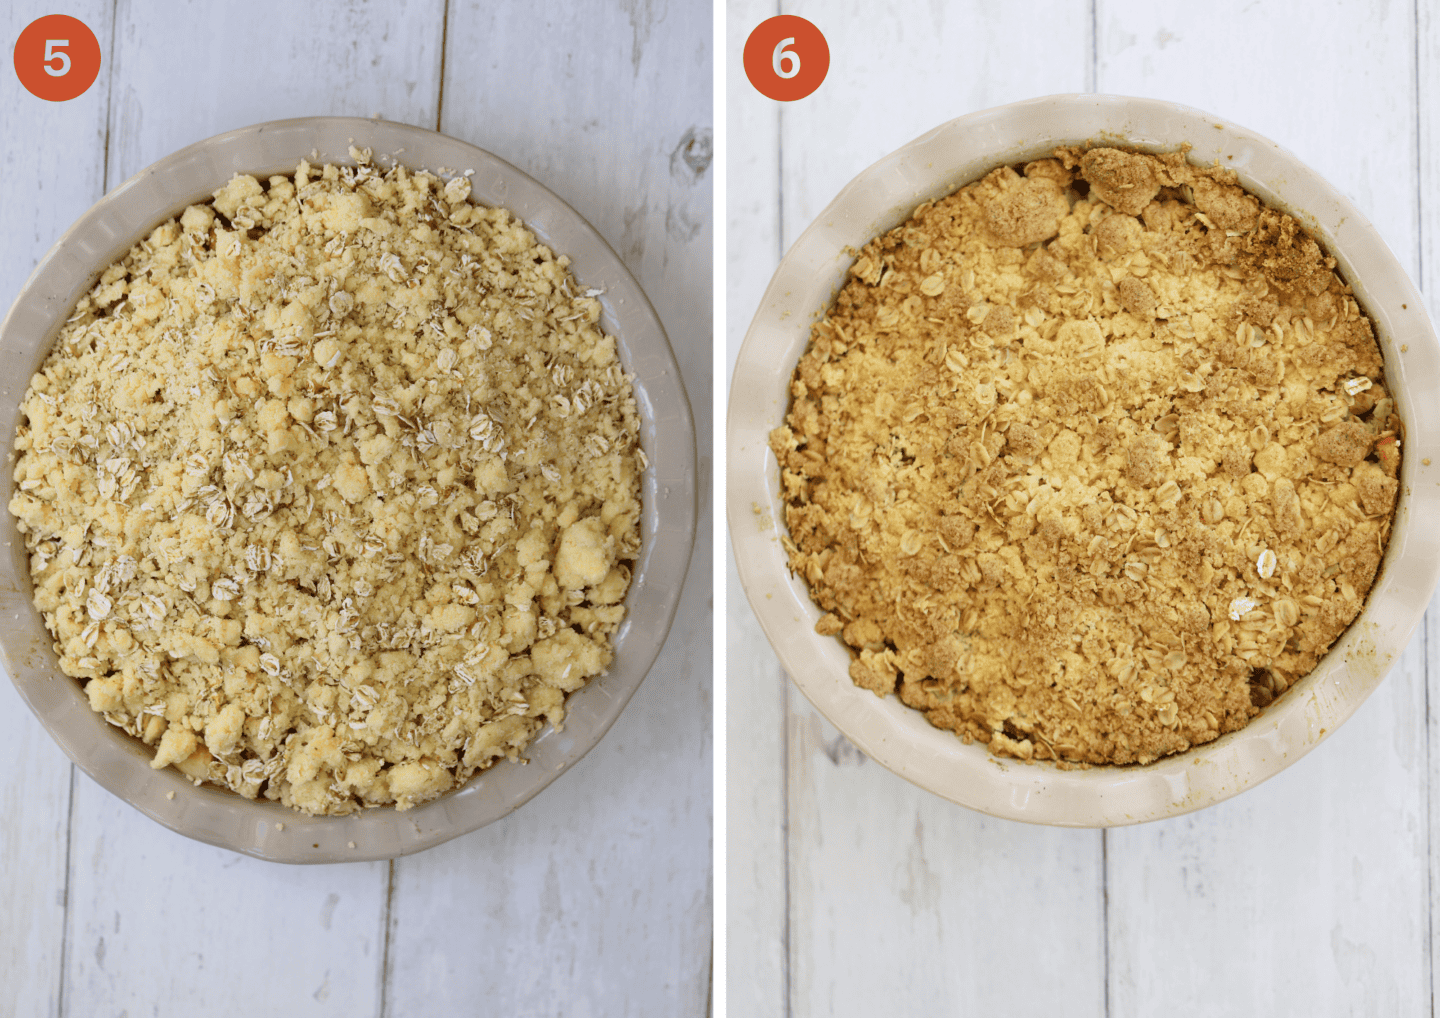 Gluten free apple crumble before and after baking.